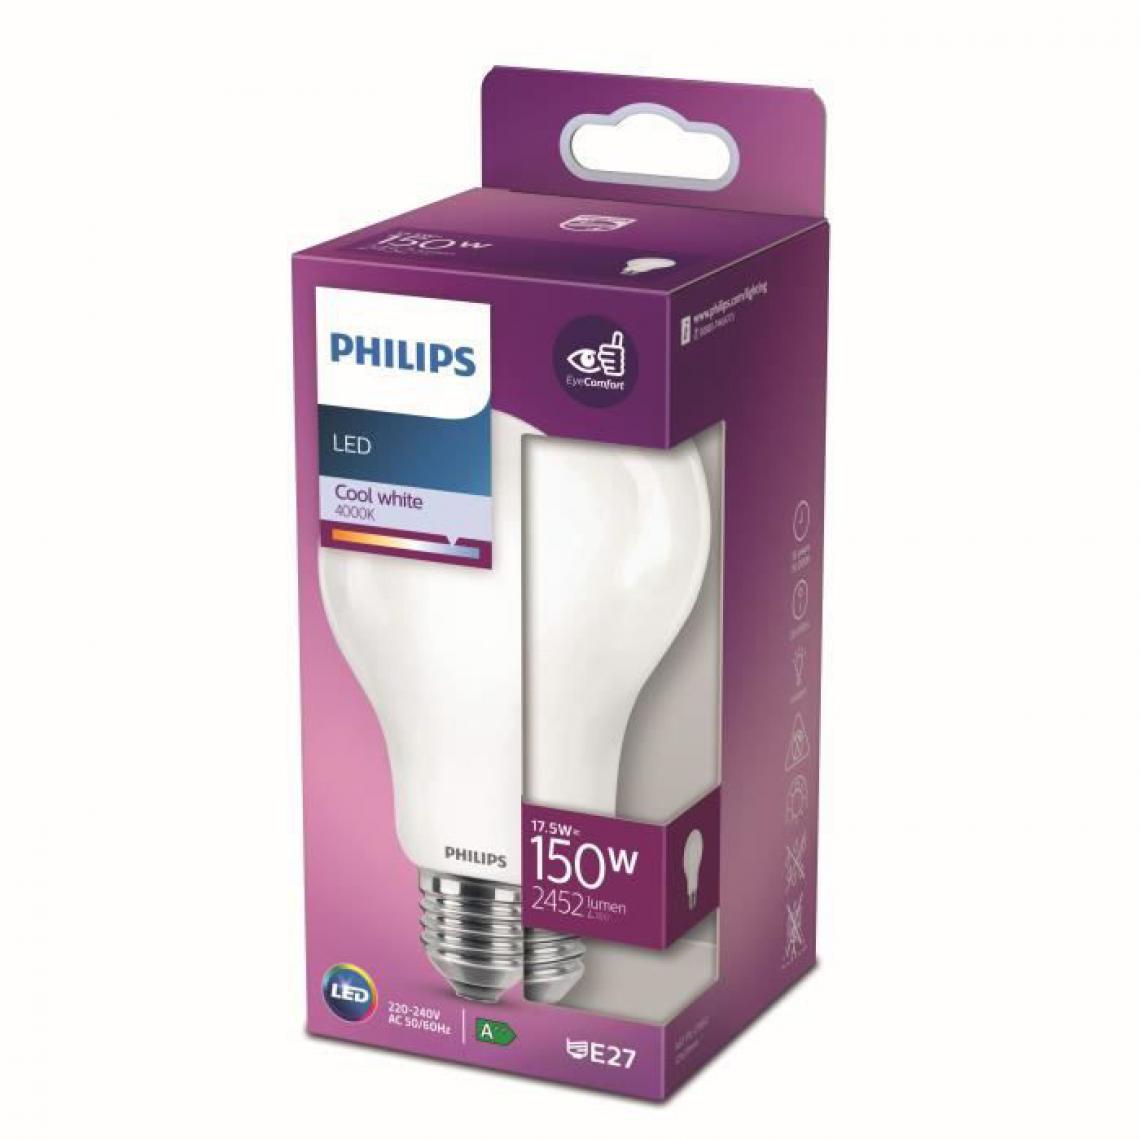 Philips - Philips Ampoule LED Equivalent 150W E27 Blanc froid Non Dimmable, verre - Ampoules LED